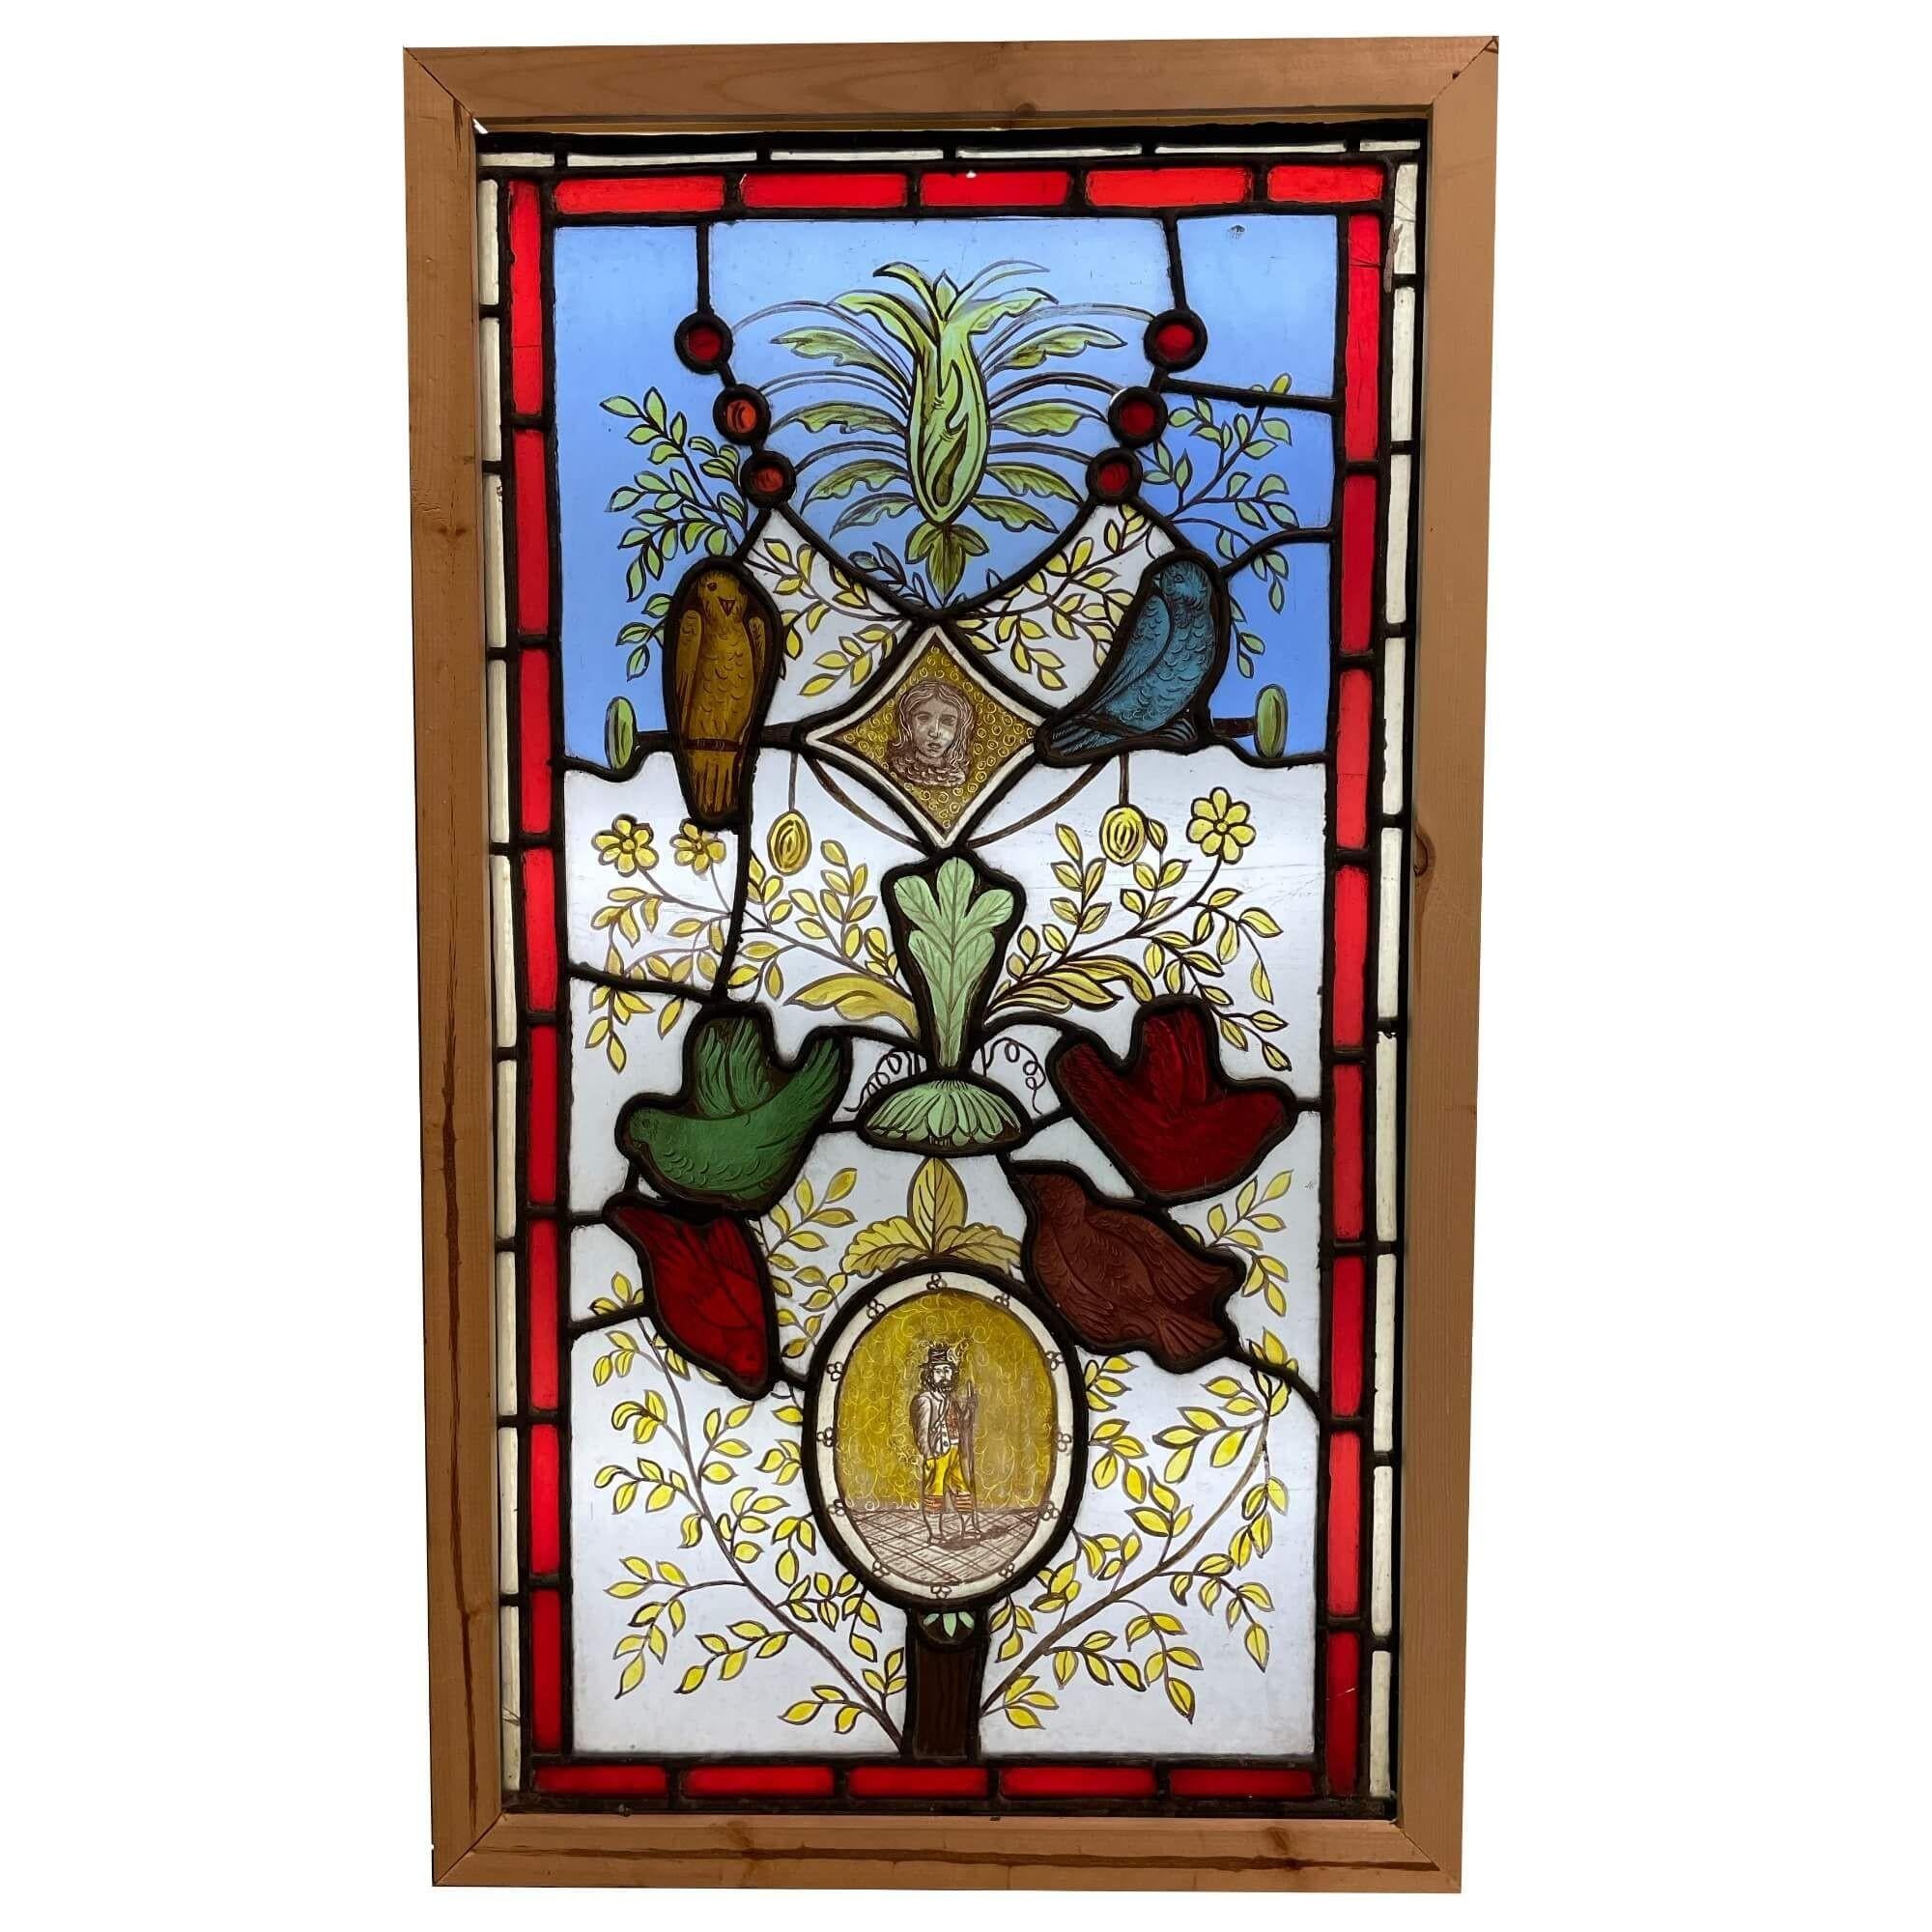 Reclaimed Victorian Stained Glass Window In Fair Condition For Sale In Wormelow, Herefordshire